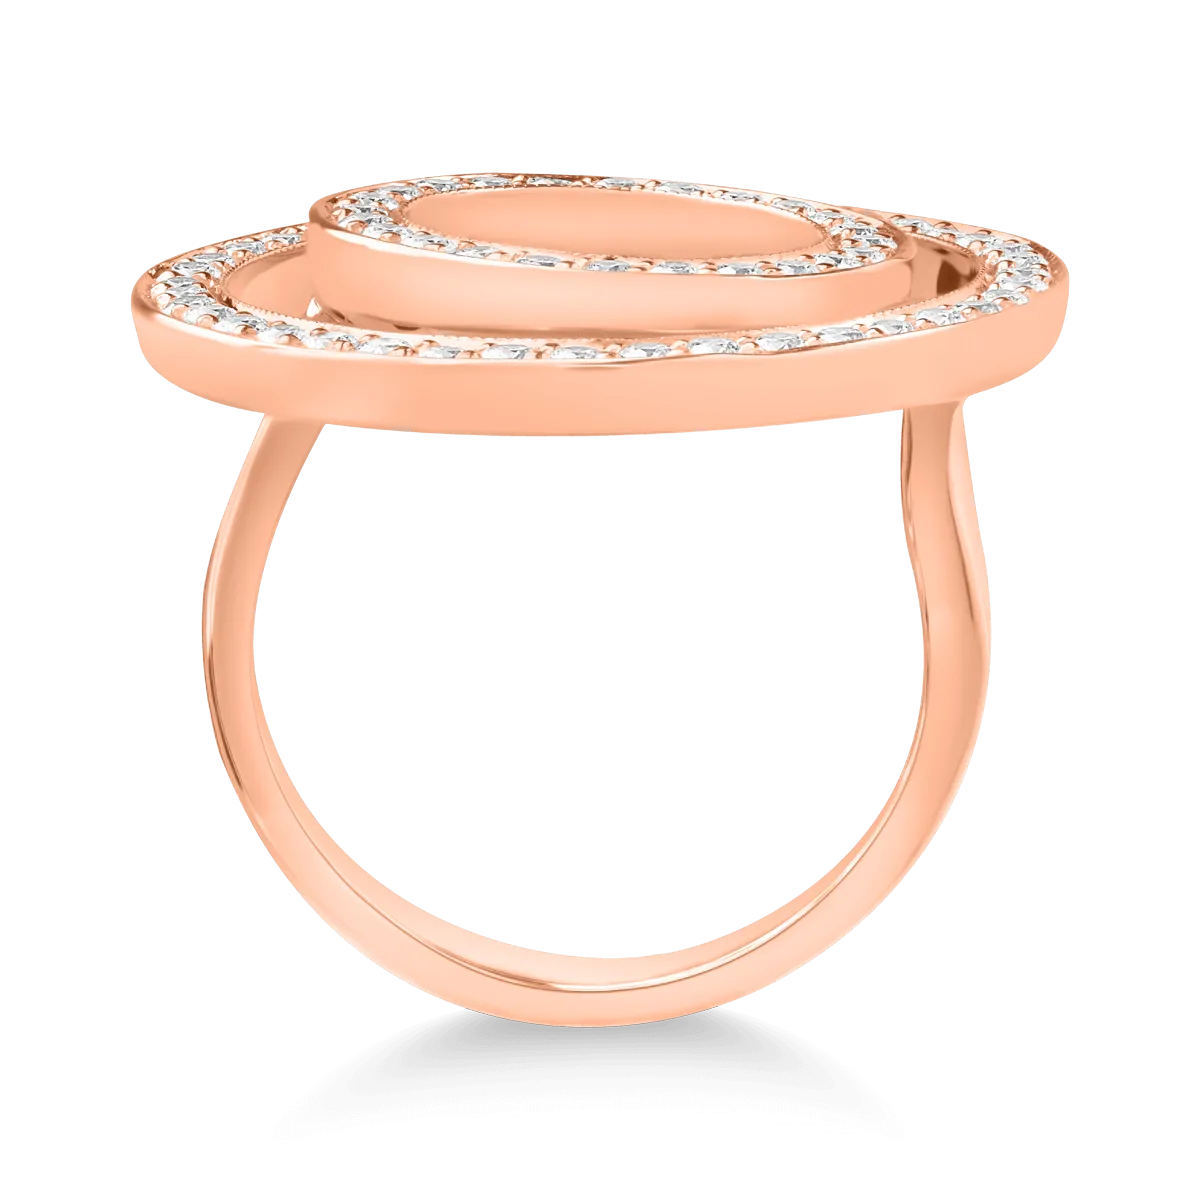 18K rose gold ring with 0.83ct diamonds